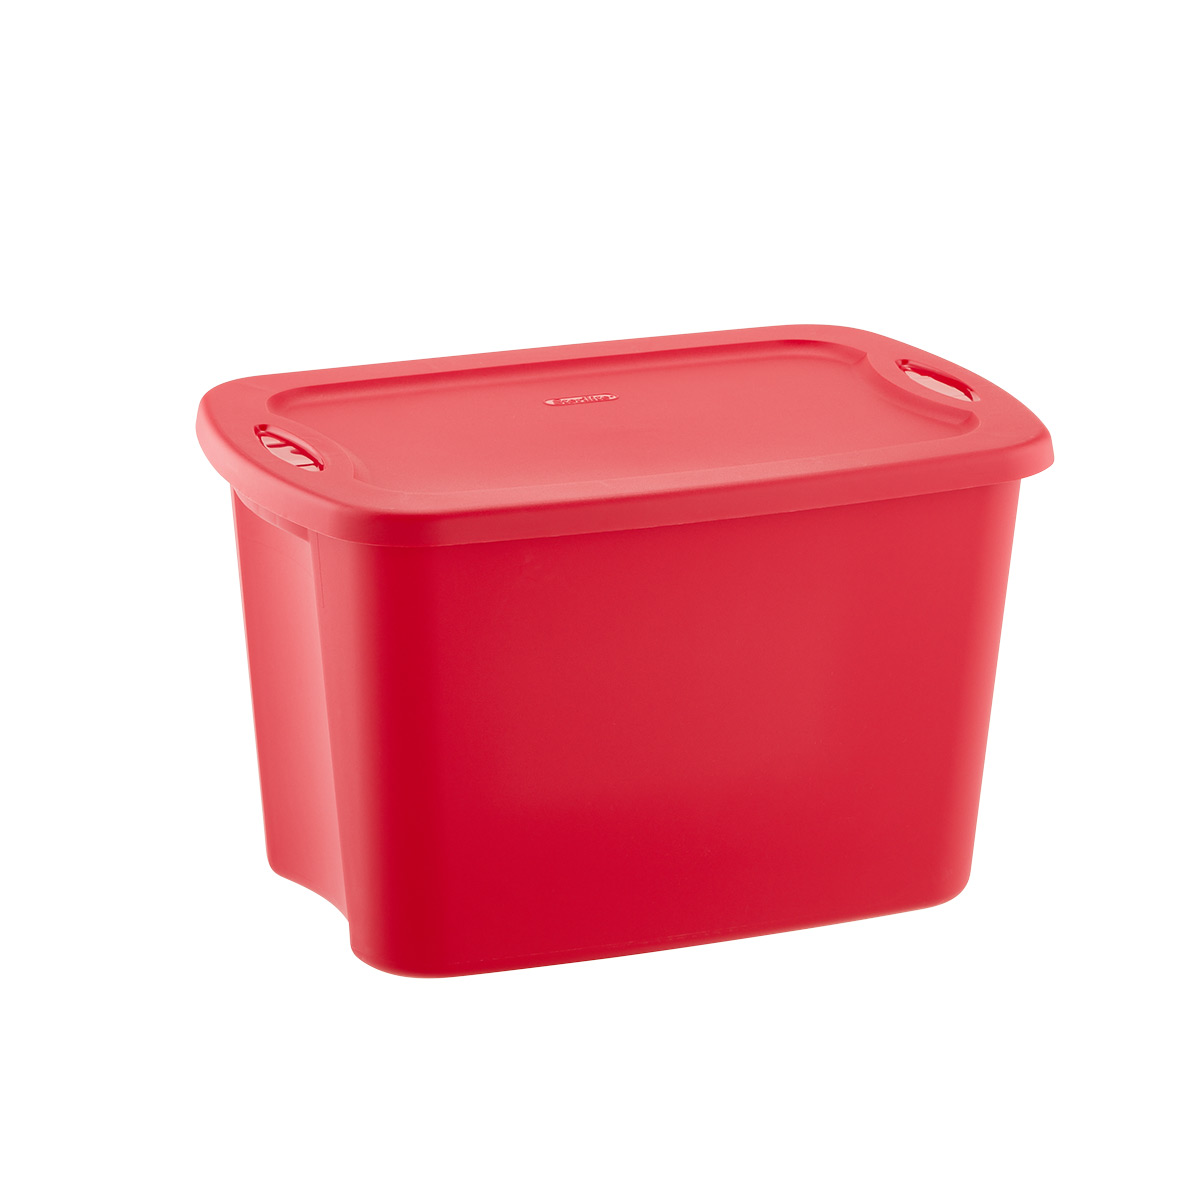 https://www.containerstore.com/catalogimages/498039/10094883-10-gallon-tote-box-red.jpg